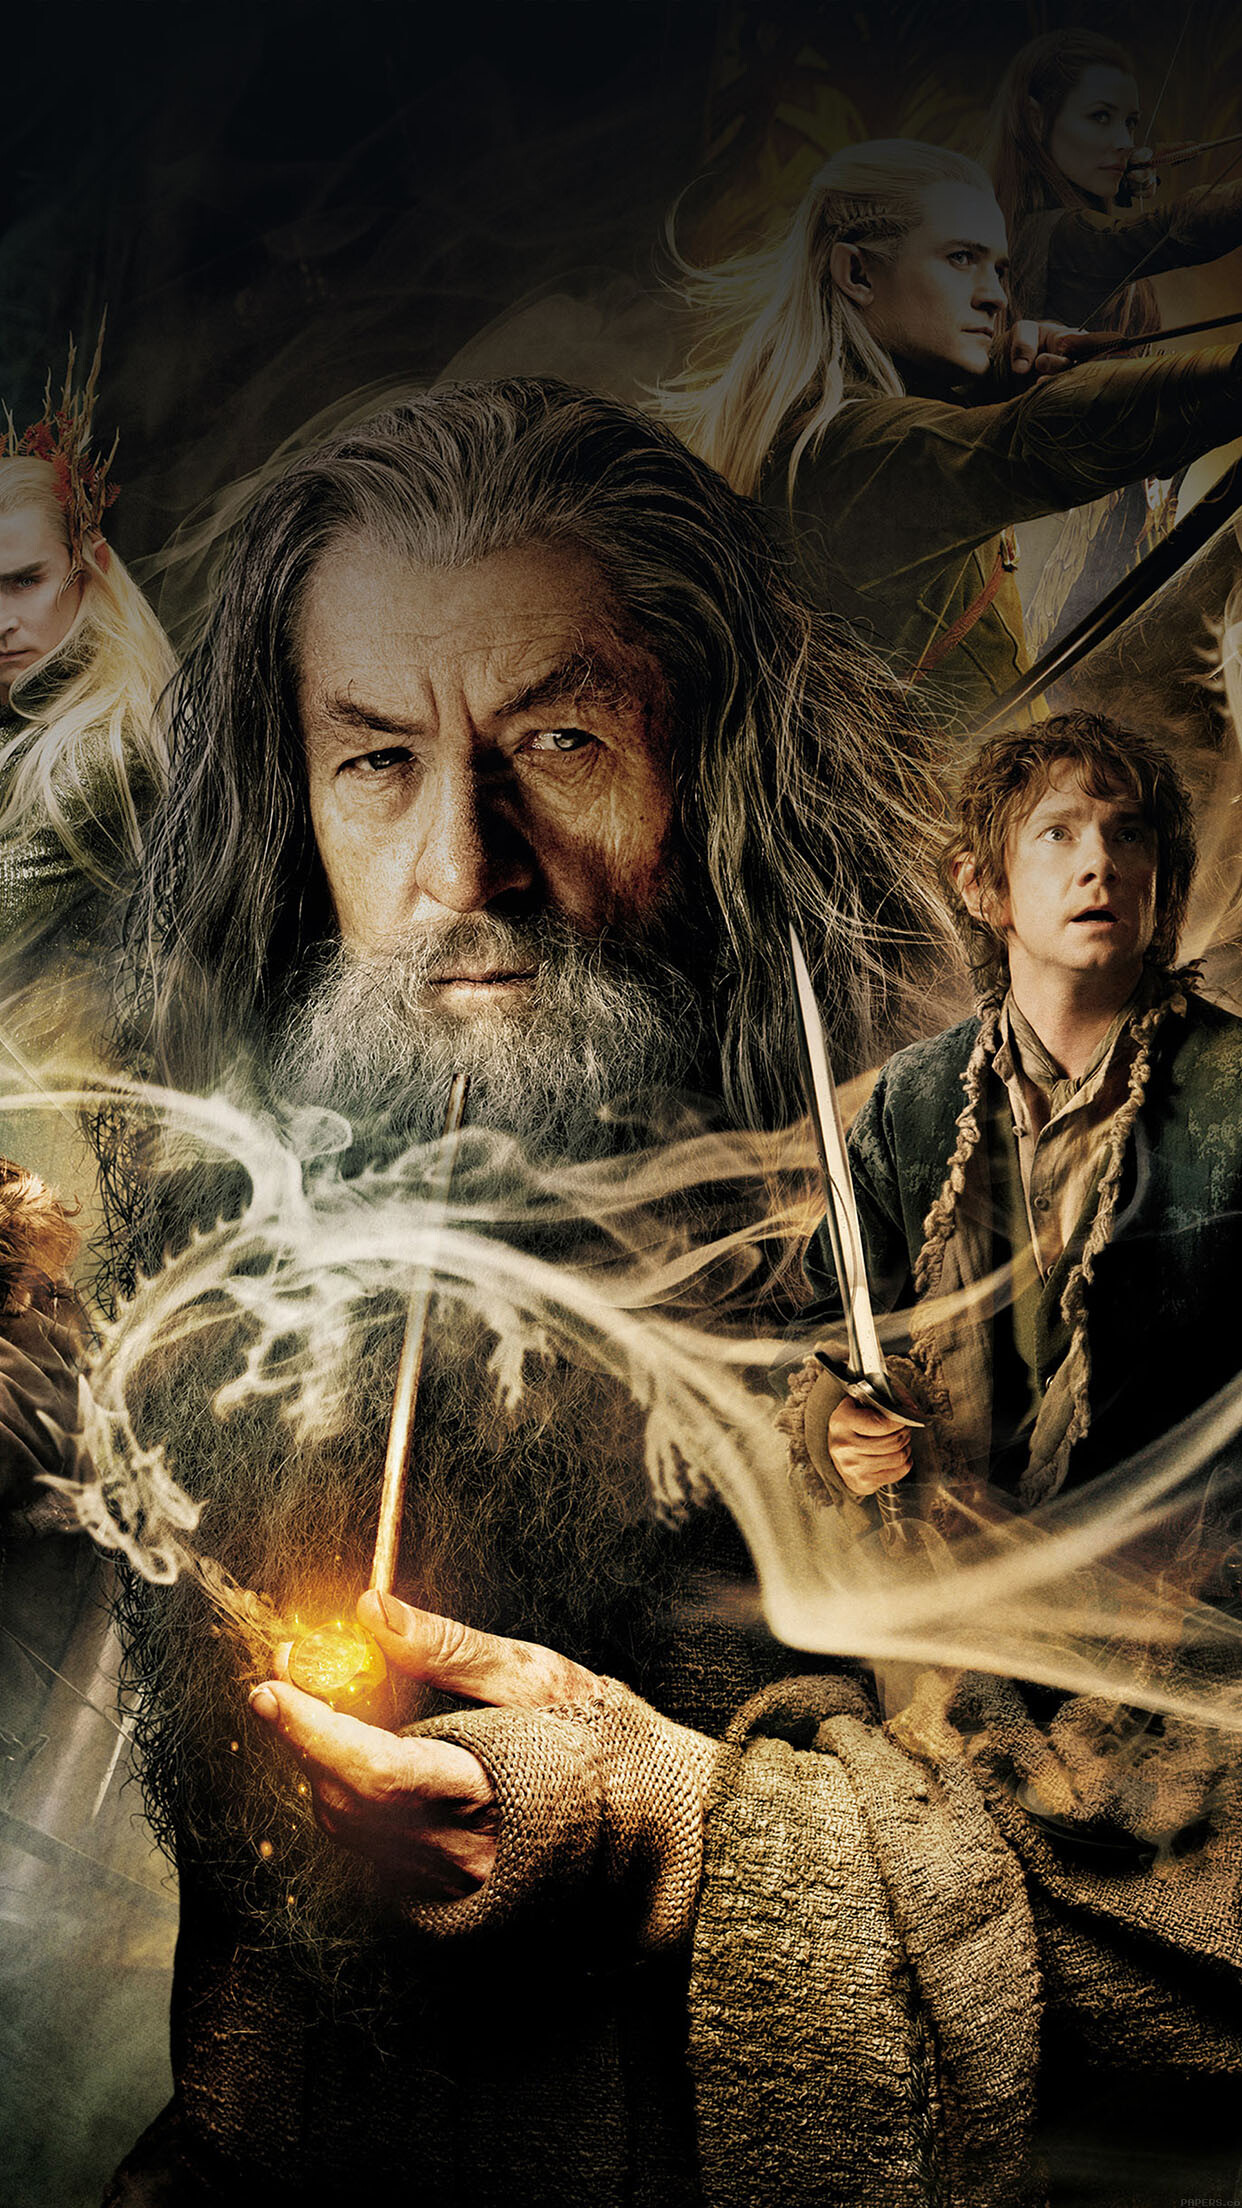 The Hobbit: The Desolation of Smaug, A 2013 epic high fantasy adventure film directed by Peter Jackson. 1250x2210 HD Background.